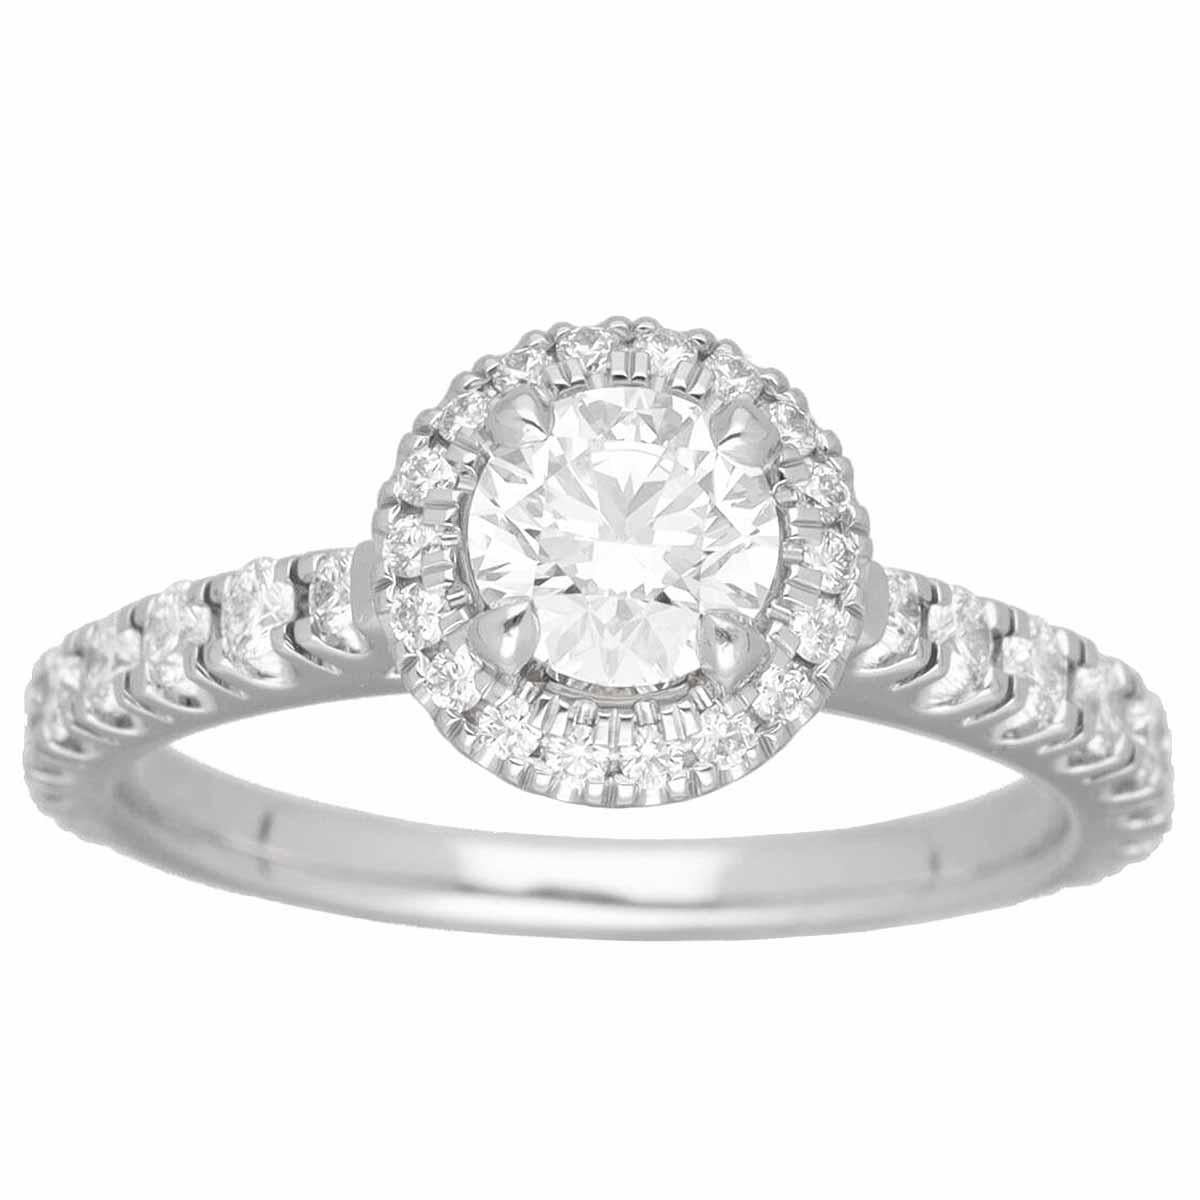 ■Item Number: 23260508
■Brand: Cartier
■Product Name: Destinée Solitaire Ring
■Model Number: -
■Material: 1P Diamond (0.51ct G-VVS1-Ex), Side Diamonds, Pt950 Platinum
■Weight: Approximately 4.2g
■Ring Size: Approximately EU：49 / USA：4.75
■Width: